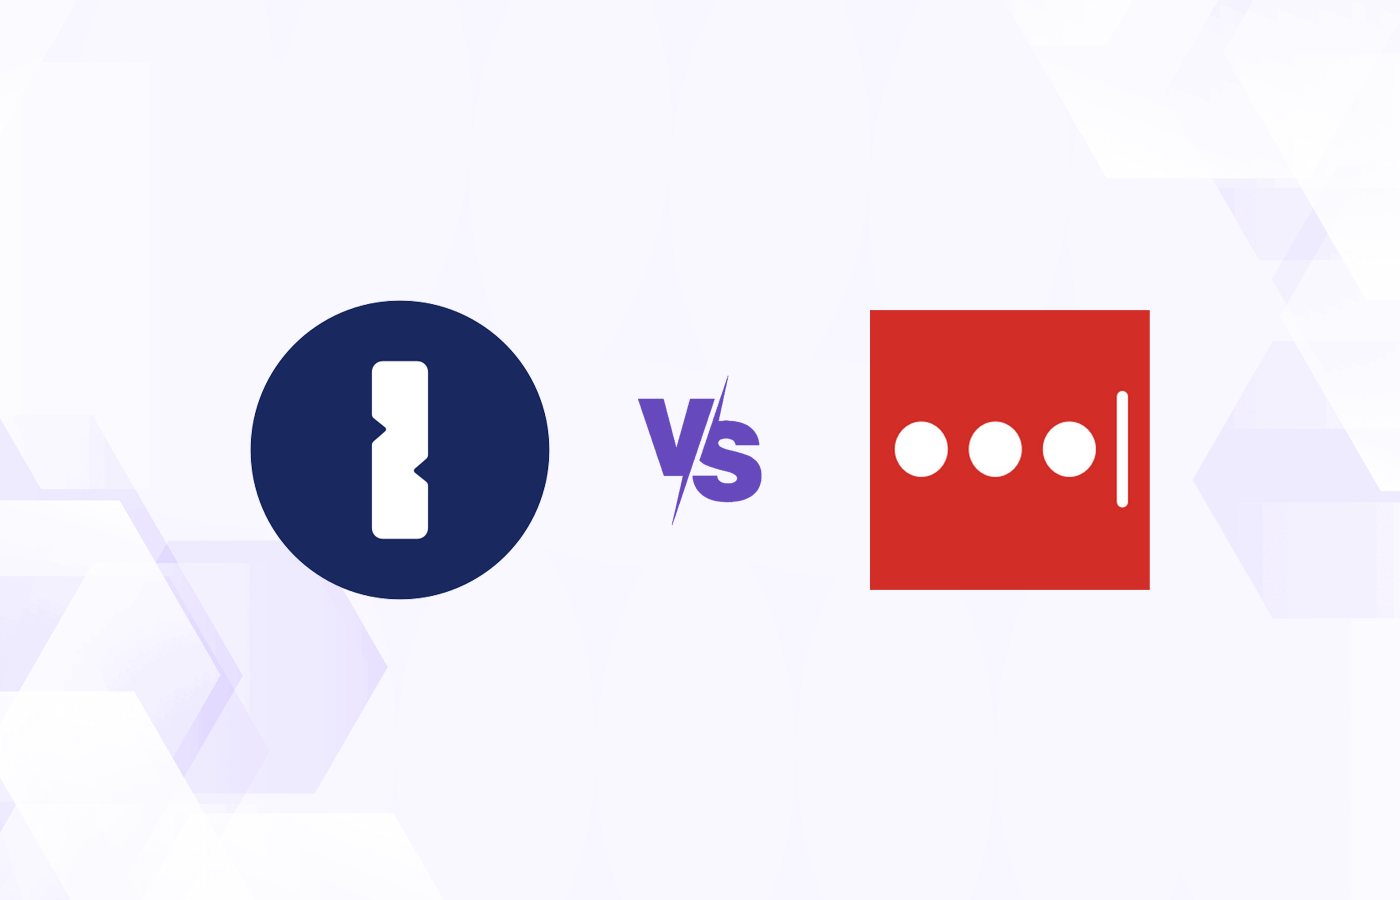 Versus graphic featuring icons of 1Password and LastPass.